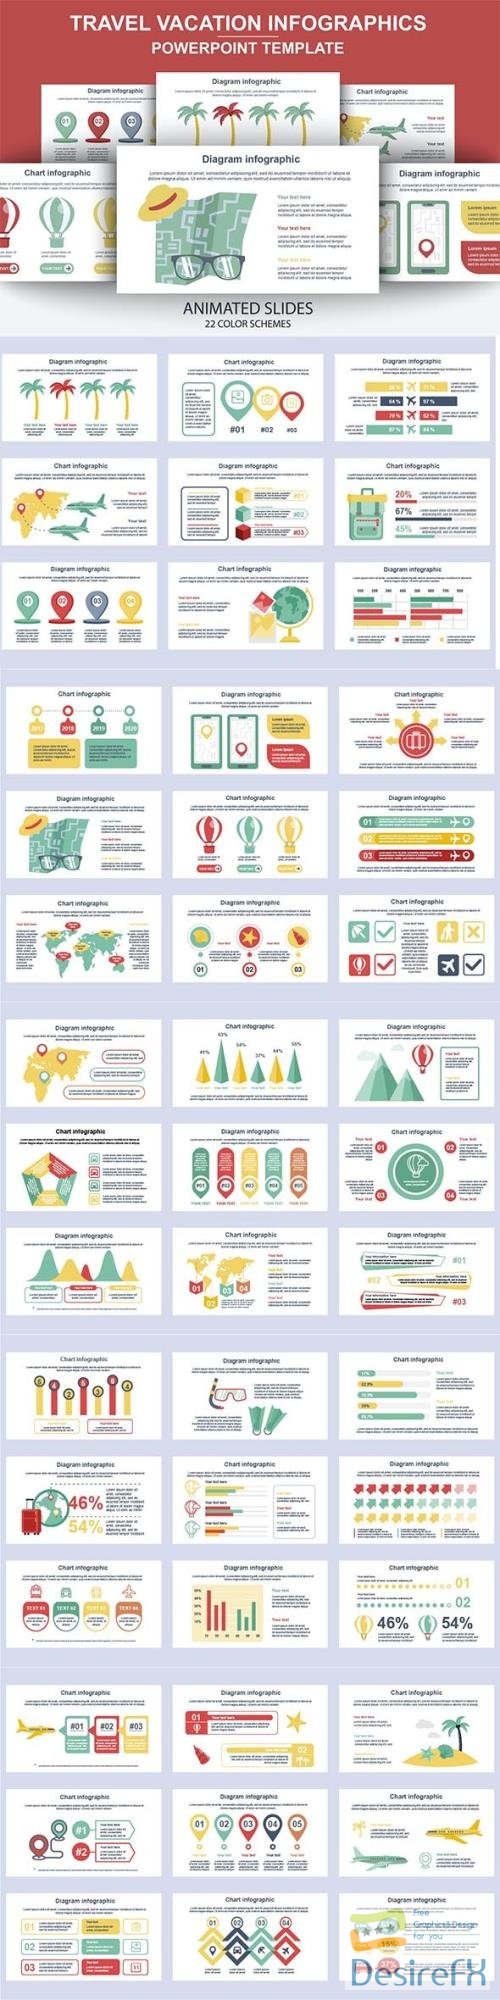 Travel Infographics Powerpoint Animated Slides 4FUY6WX